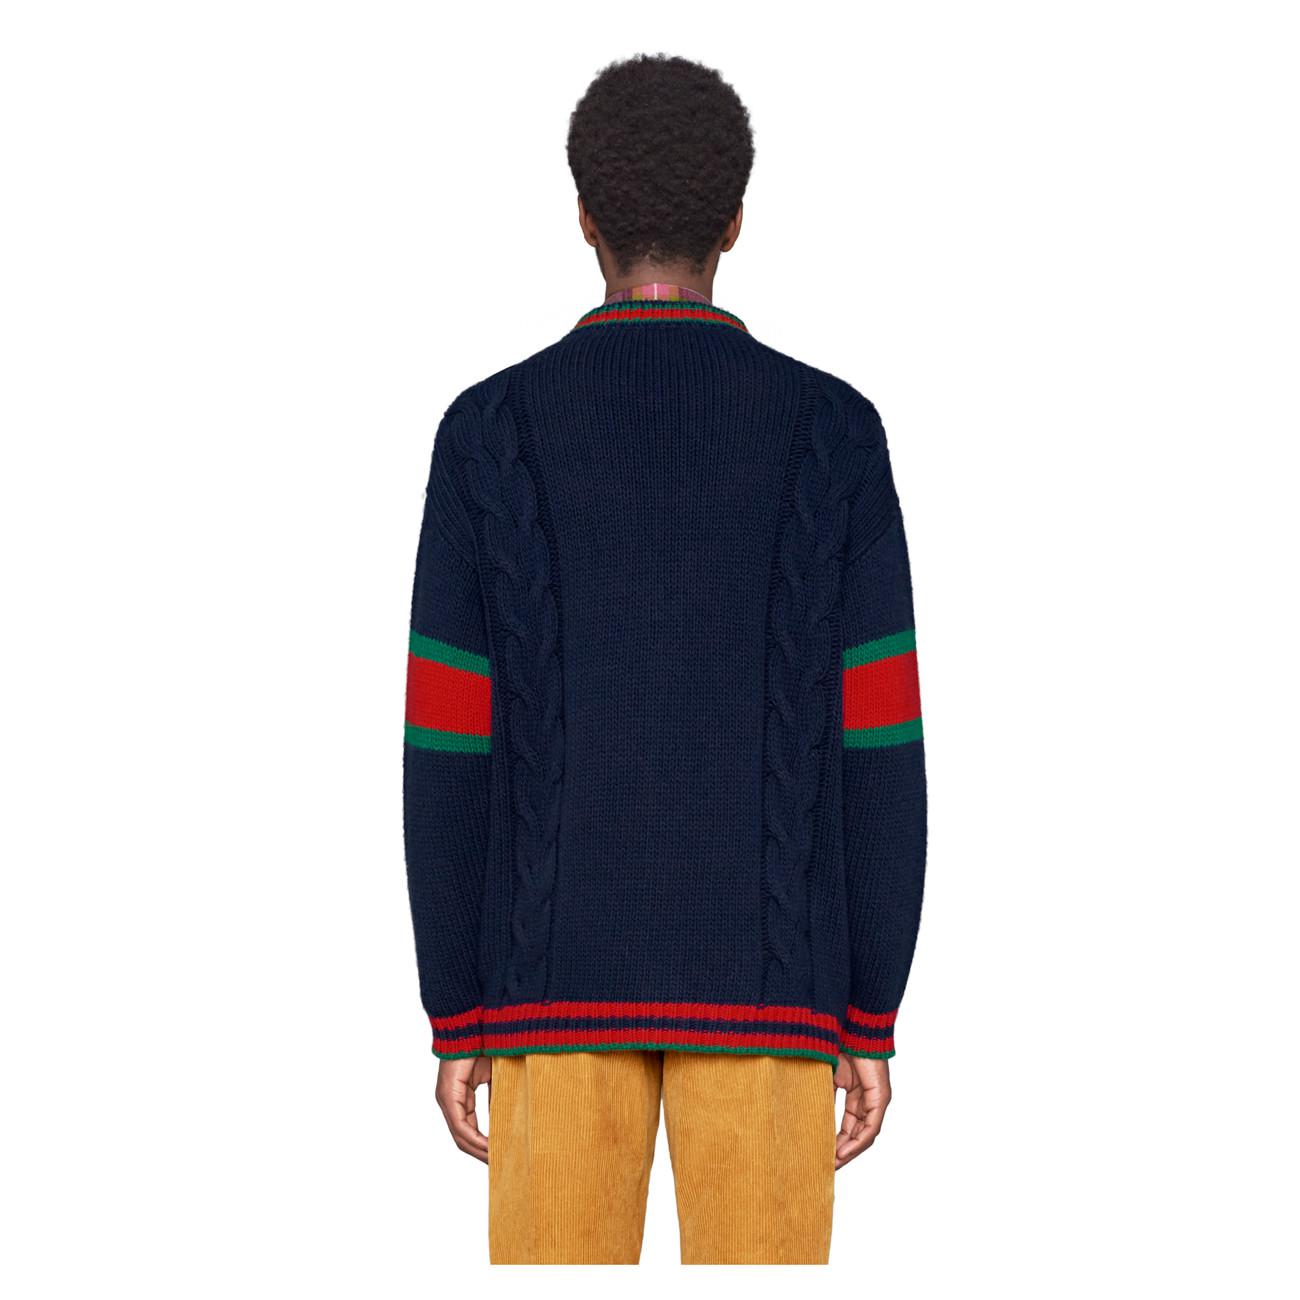 Gucci Wool Oversize Cable Knit Cardigan in Blue for Men - Lyst